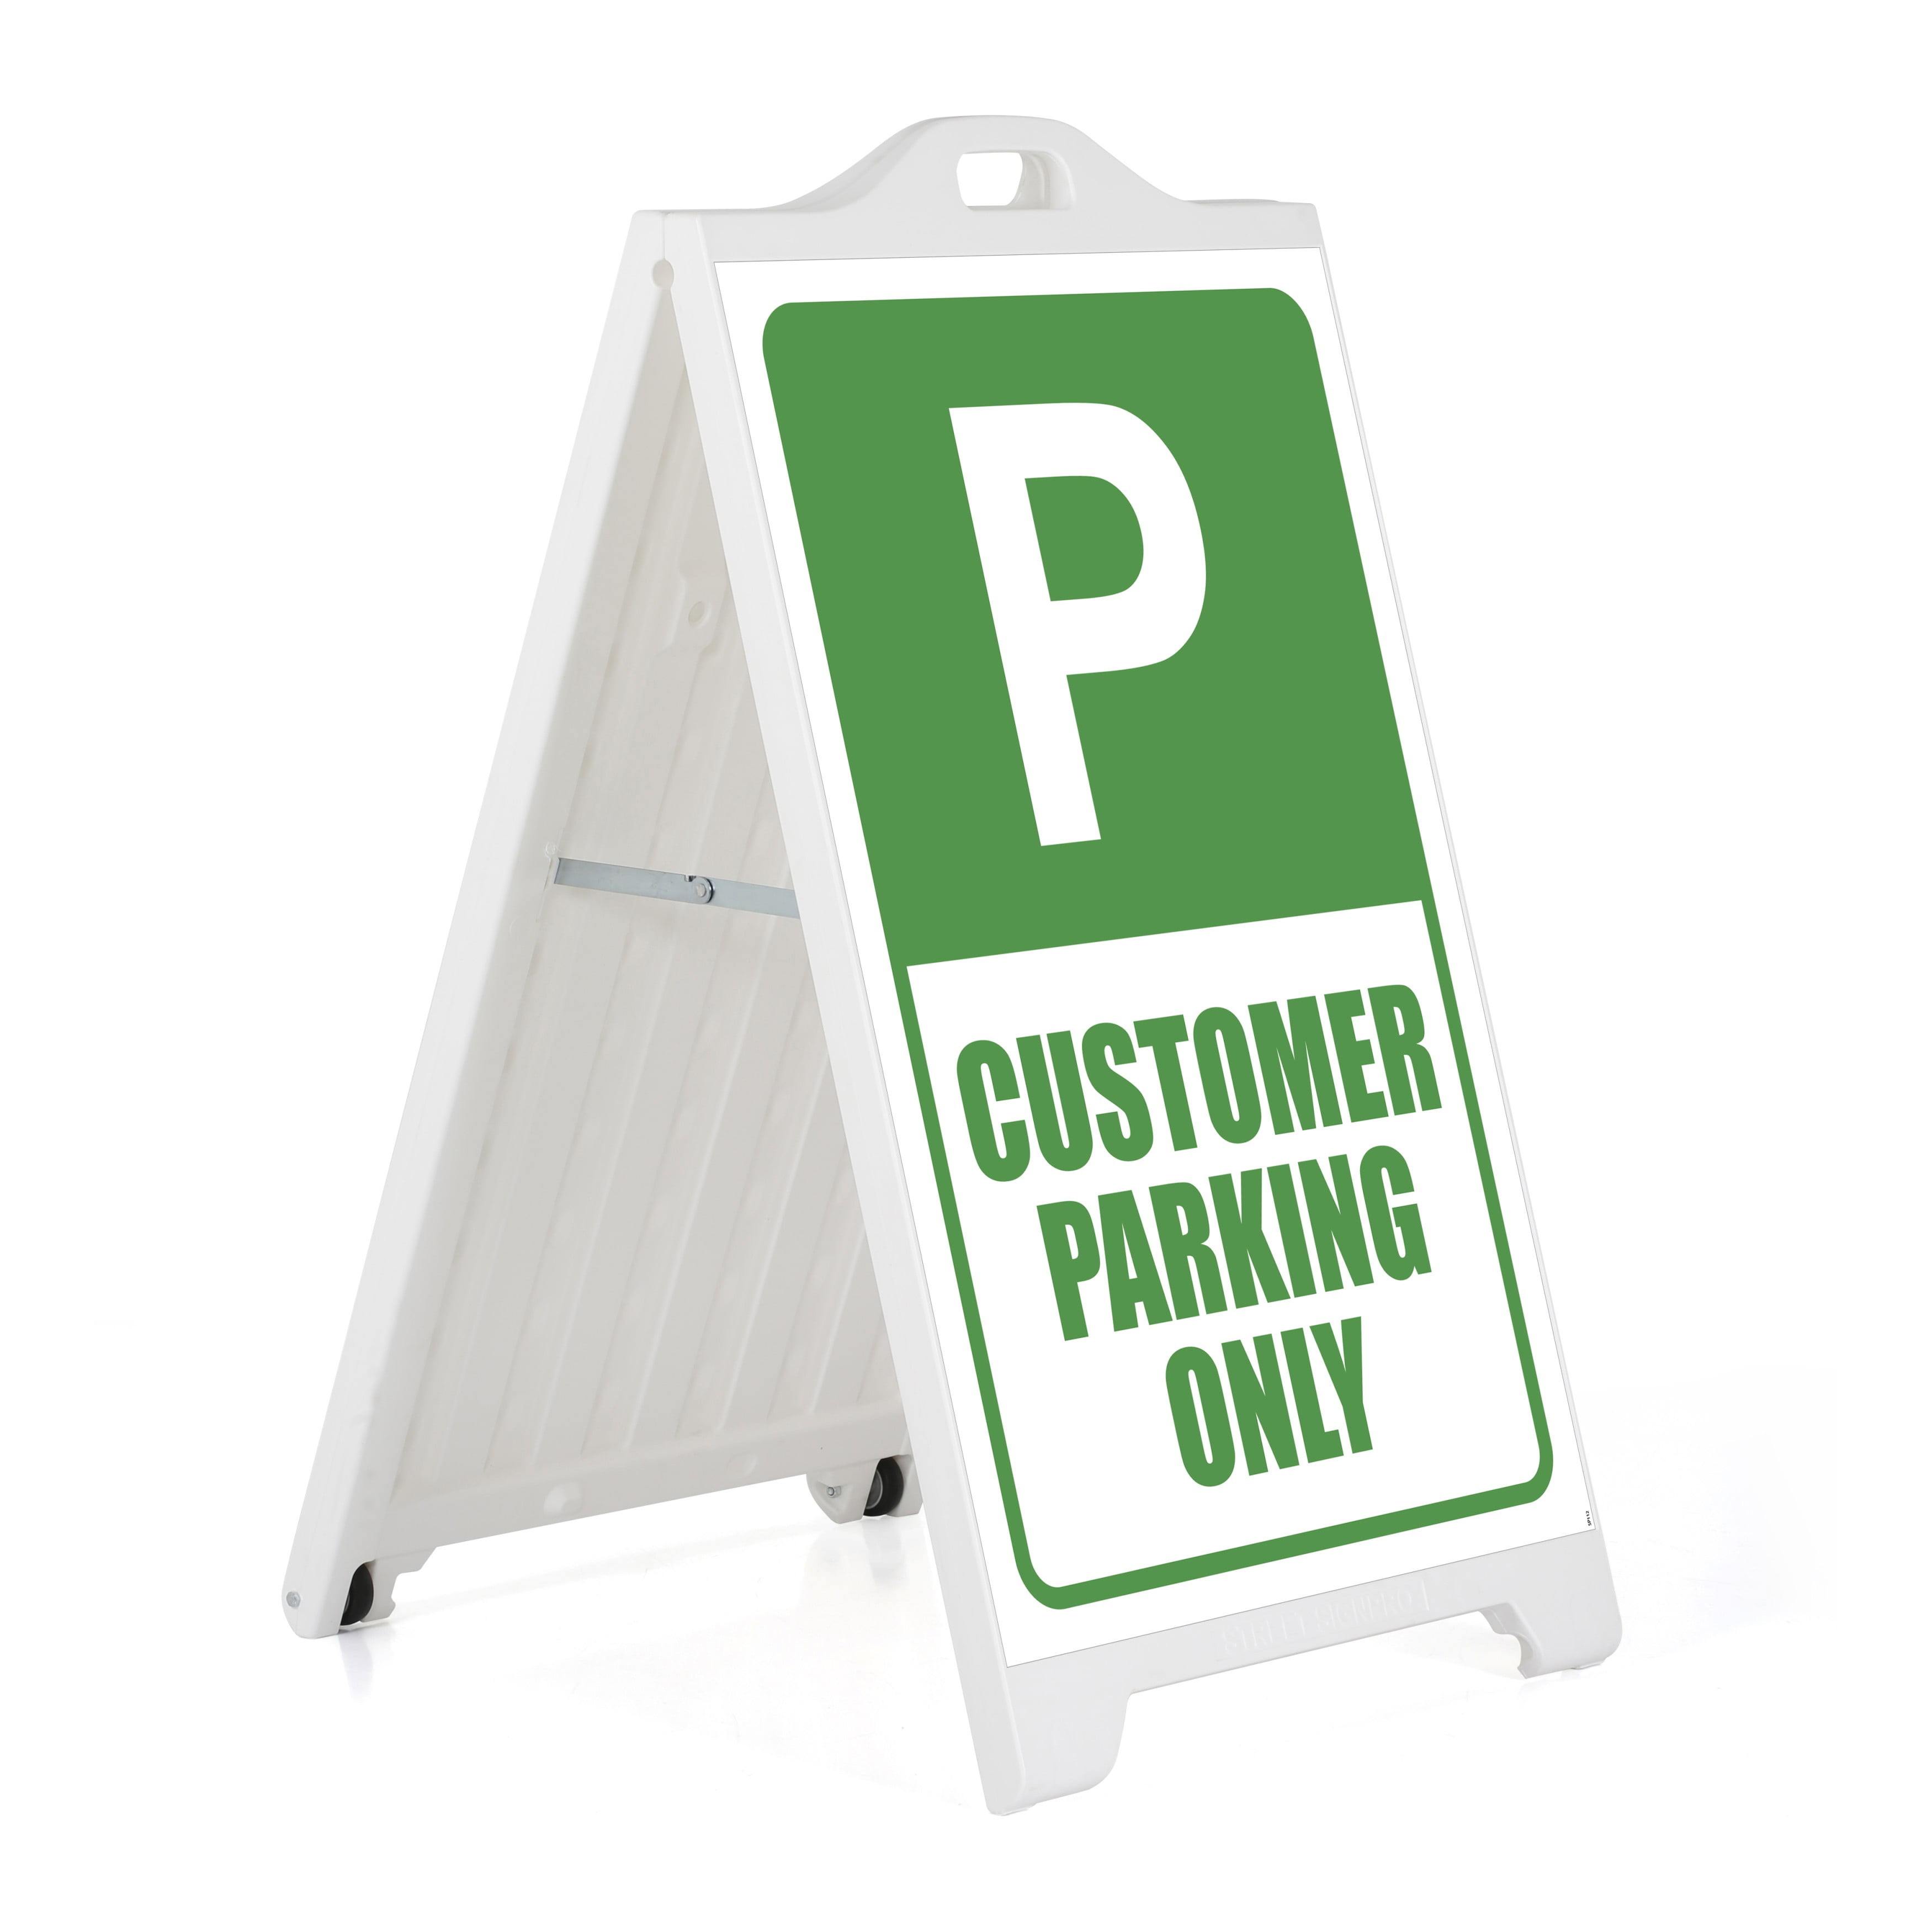 M&T Displays White Street SignPro Board, Weatherproof A-Frame Sidewalk Curb Sign with 2 24x36 inch Matt CUSTOMER PARKING ONLY Sticker Signs, Folding Portable Double Sided - Walmart.com